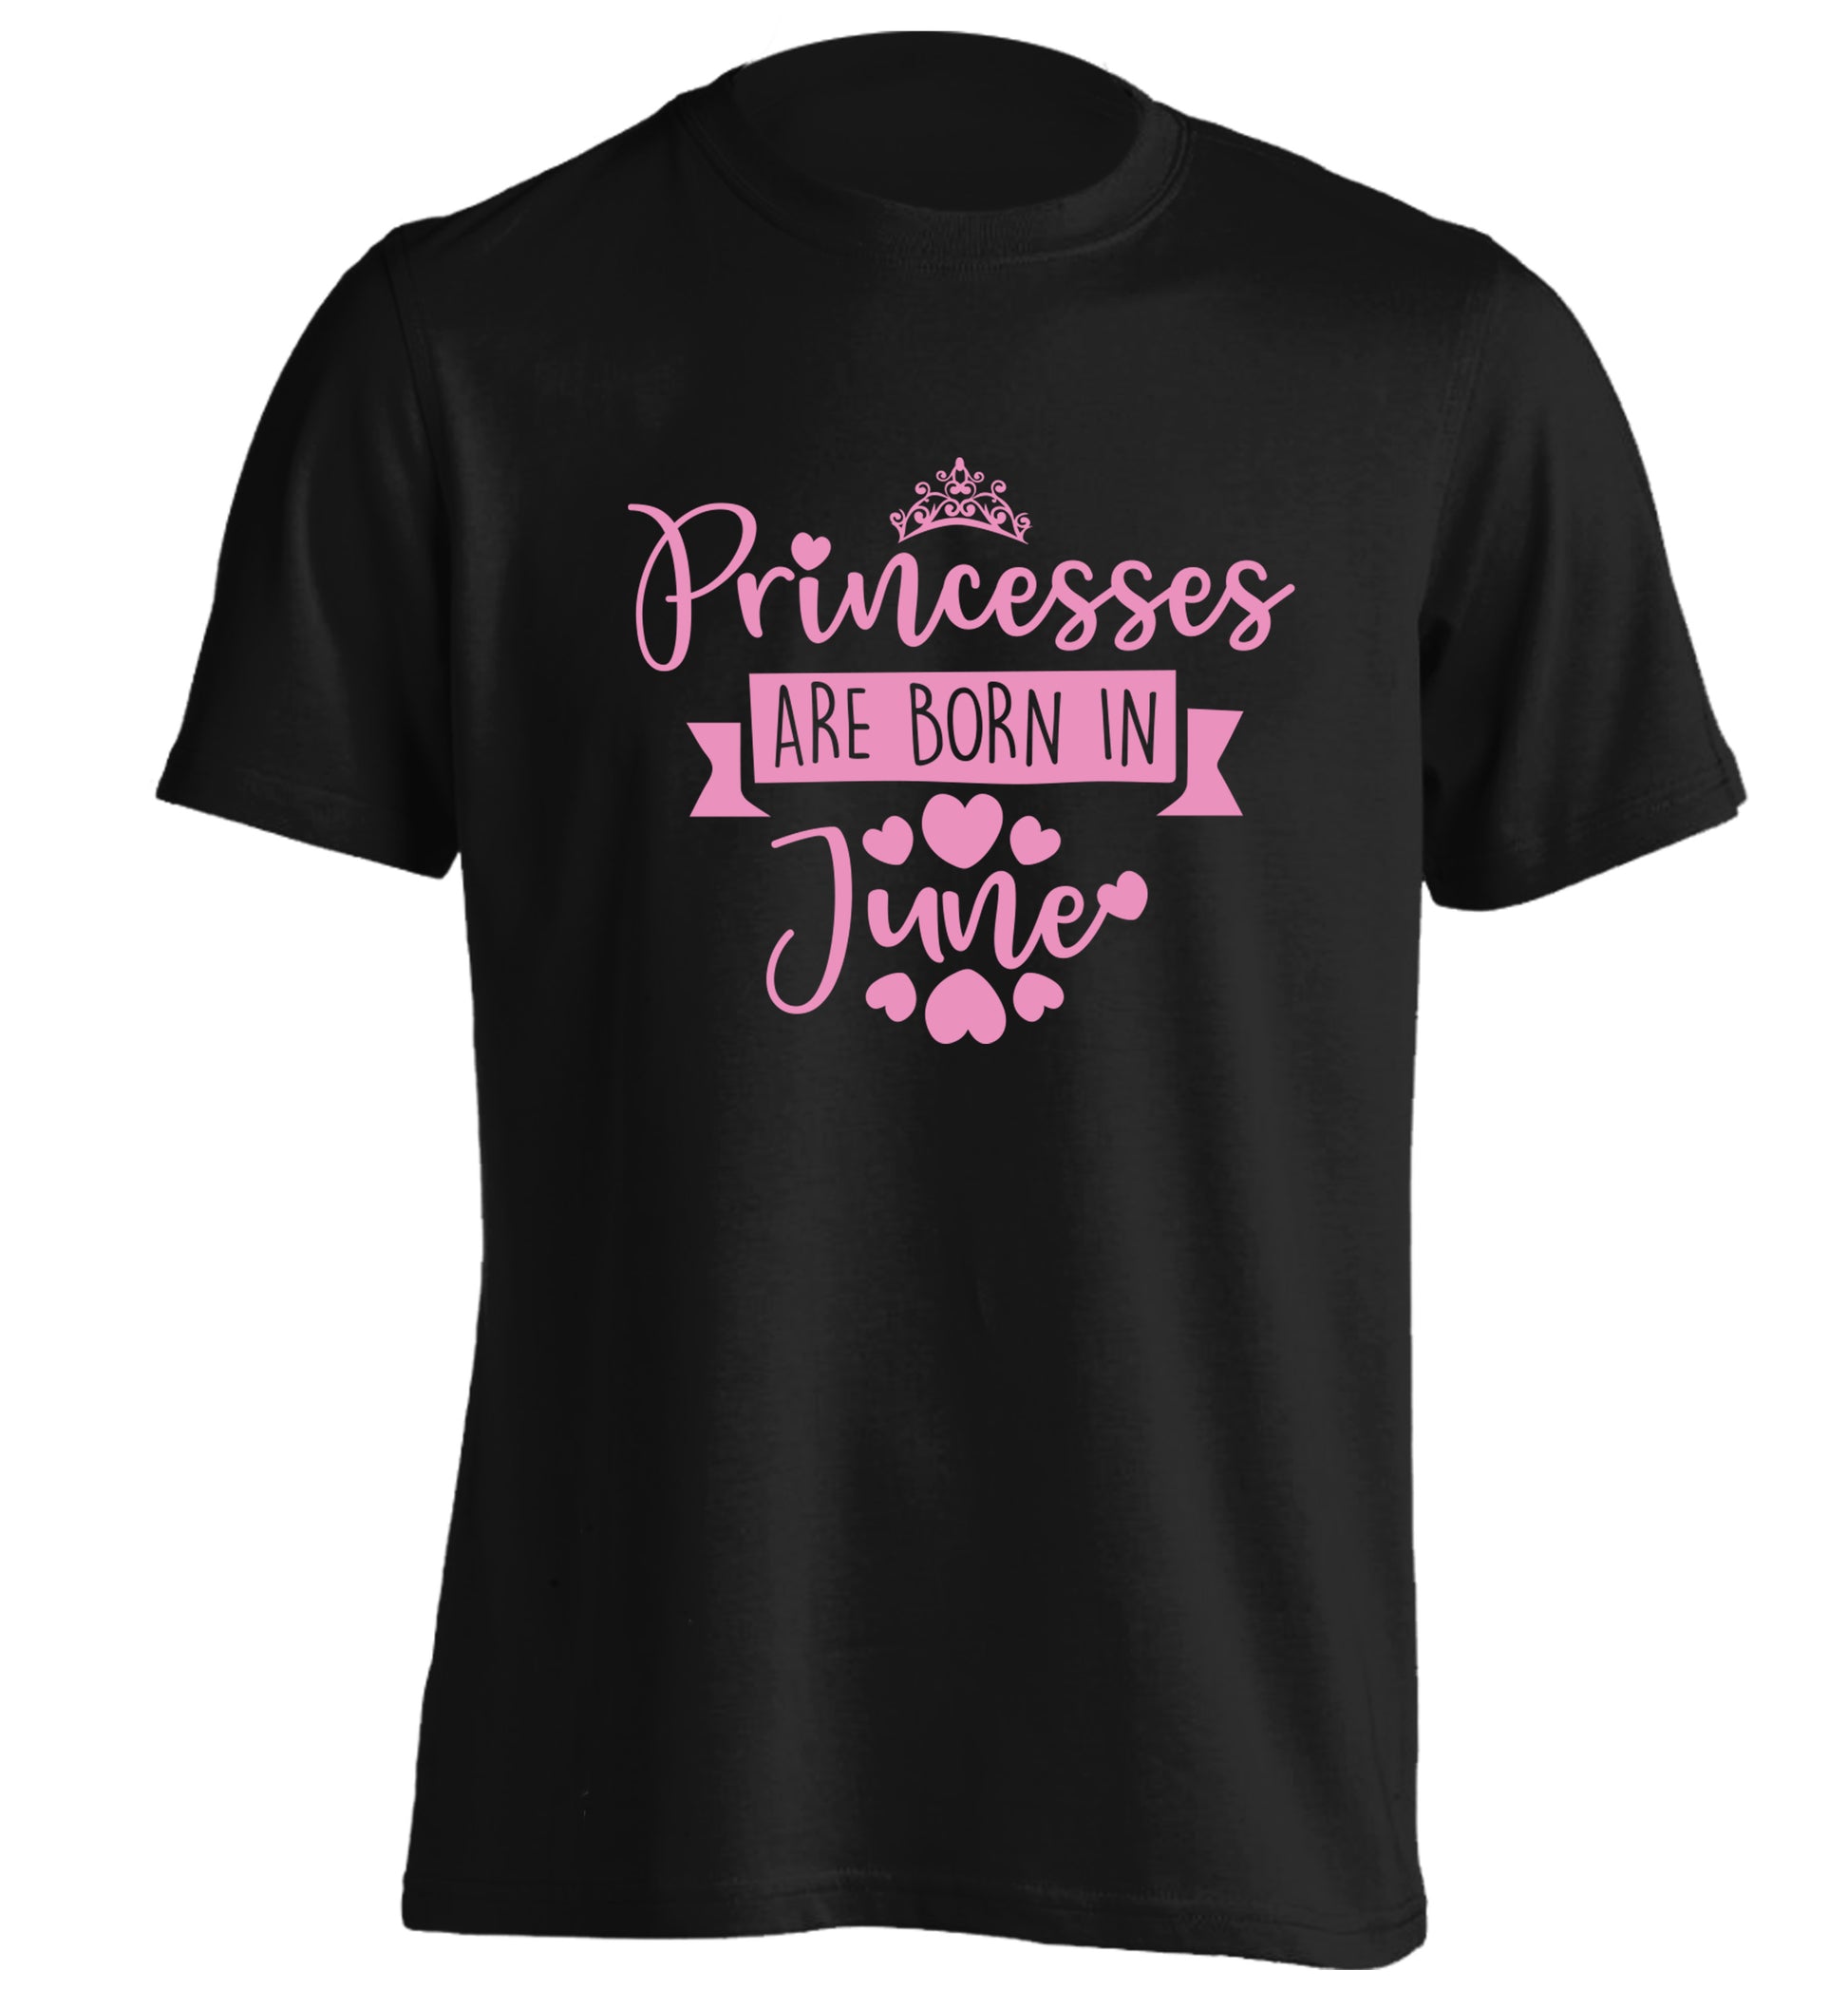 Princesses are born in June adults unisex black Tshirt 2XL